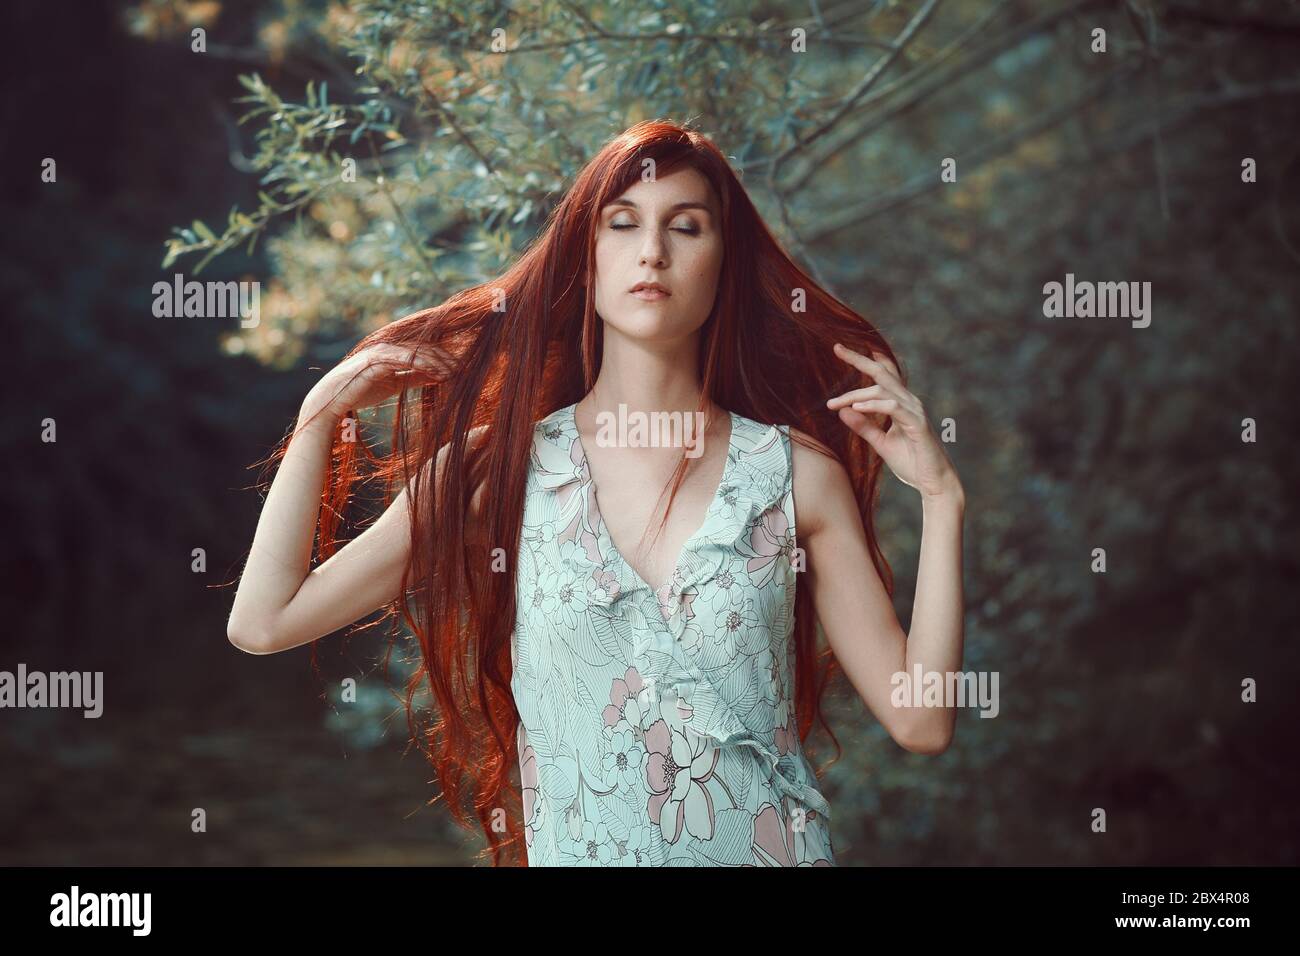 Long red hair woman . Simple outdoor portrait Stock Photo